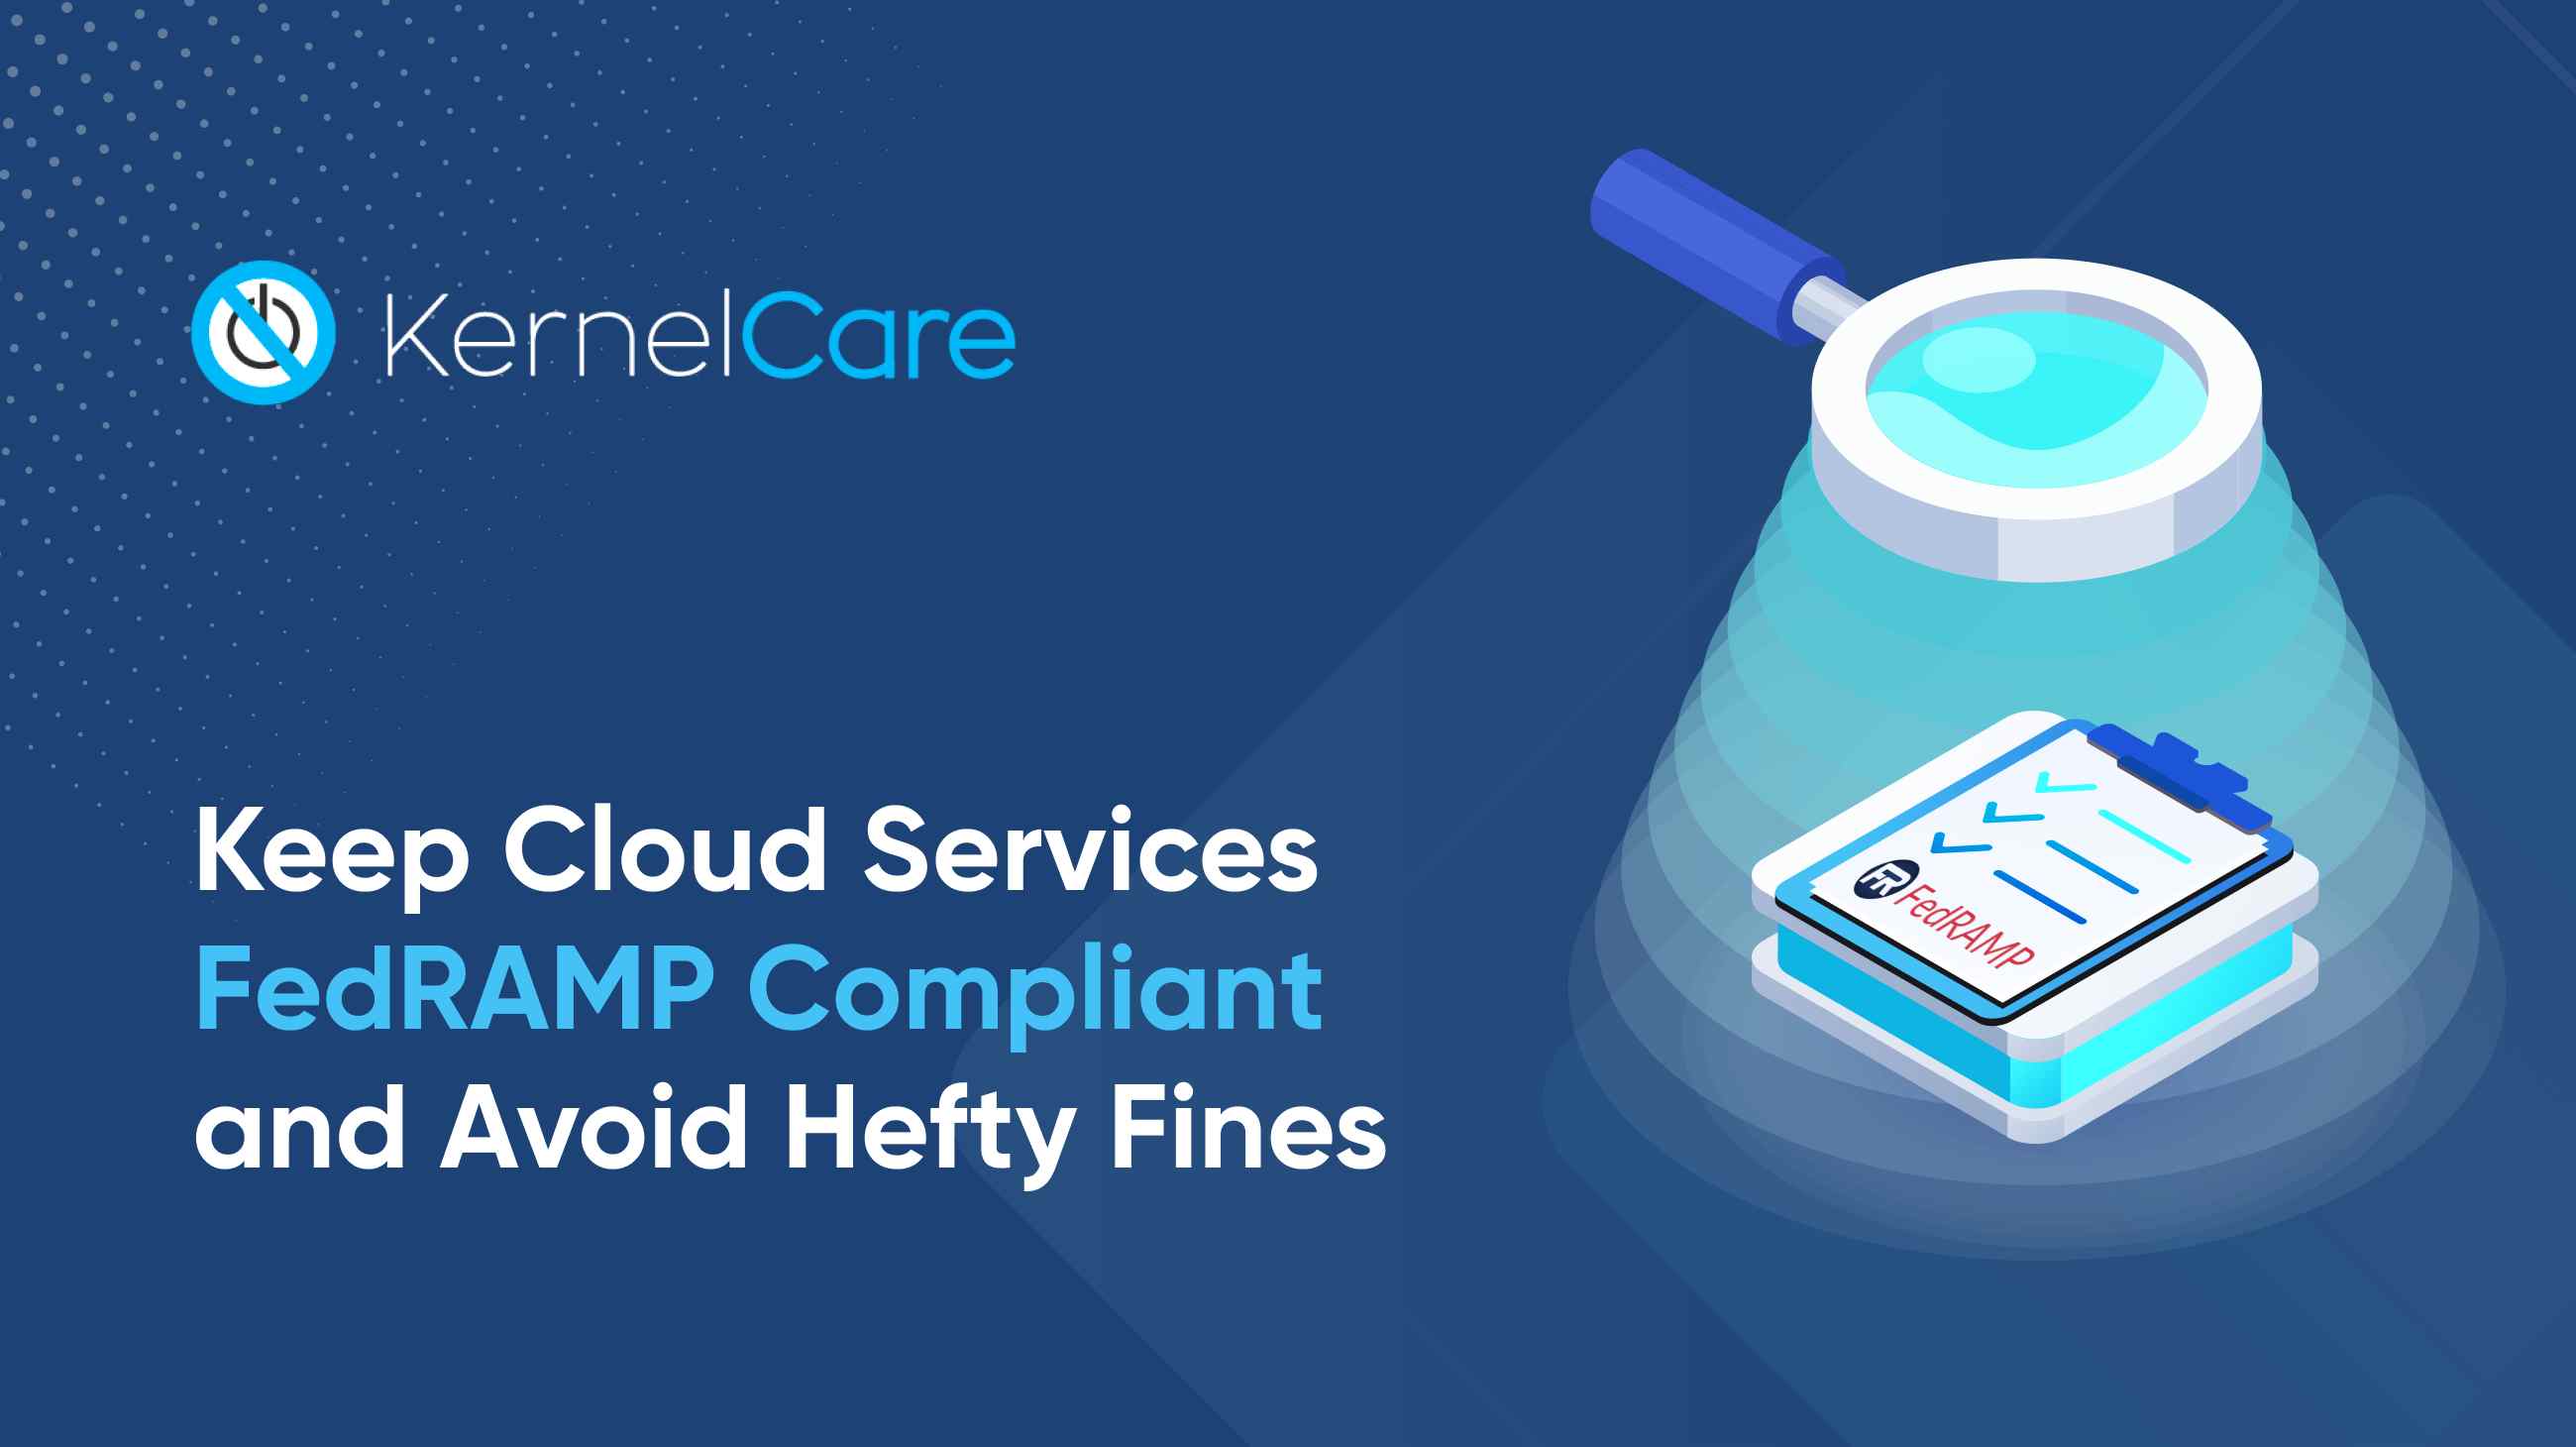 Keep Cloud Services FedRAMP Compliant and Avoid Hefty Fines